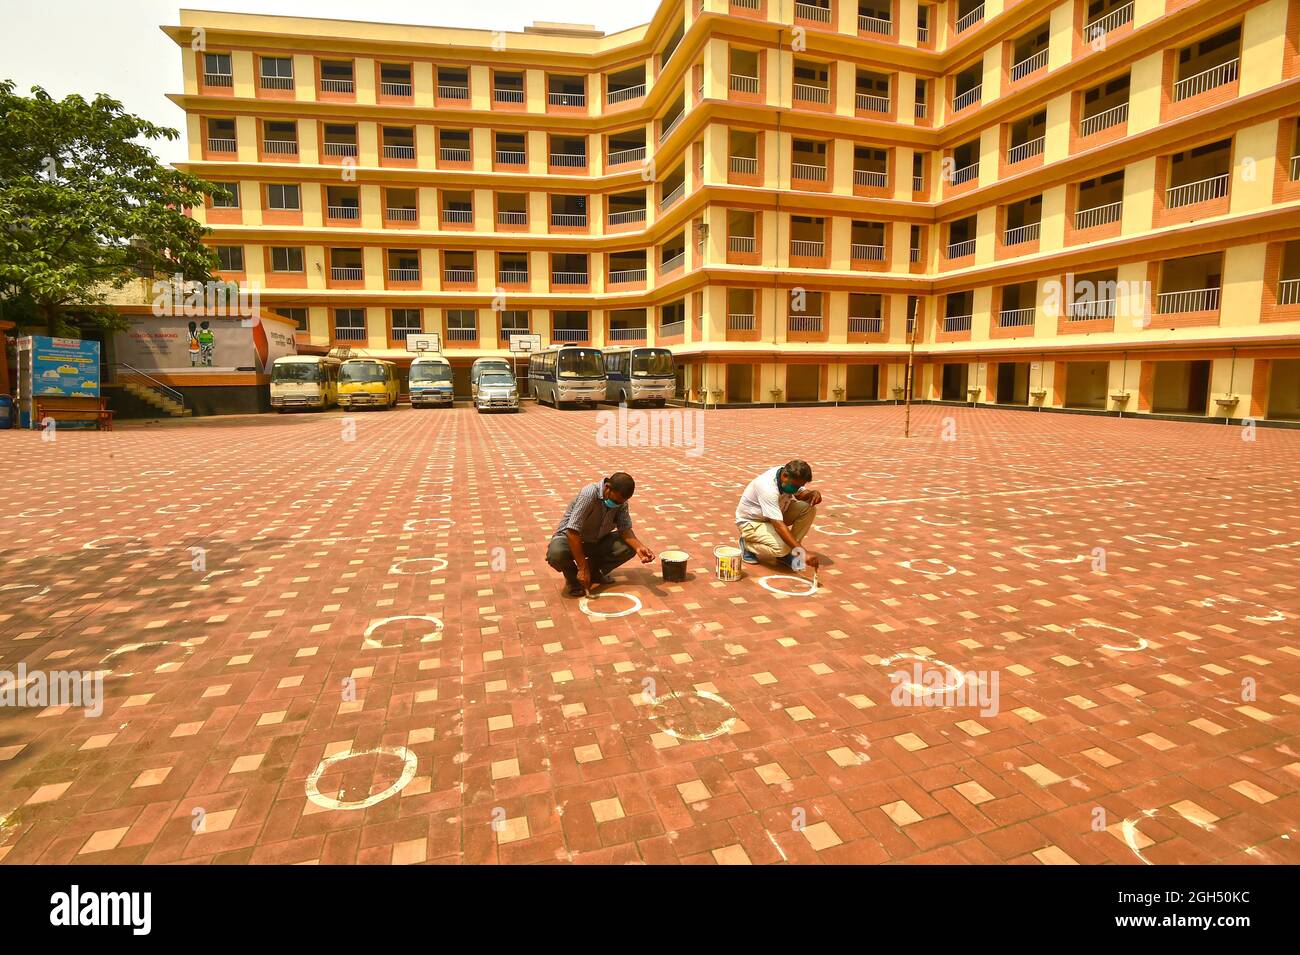 Dhaka. 5th Sep, 2021. Staff members paint circles following social distancing norms ahead of reopening of school in Dhaka, Bangladesh, on Sept. 5, 2021. The Bangladeshi government has announced the reopening of schools and colleges in the country from Sept. 12 after a closure of around 18 months. Credit: Xinhua/Alamy Live News Stock Photo